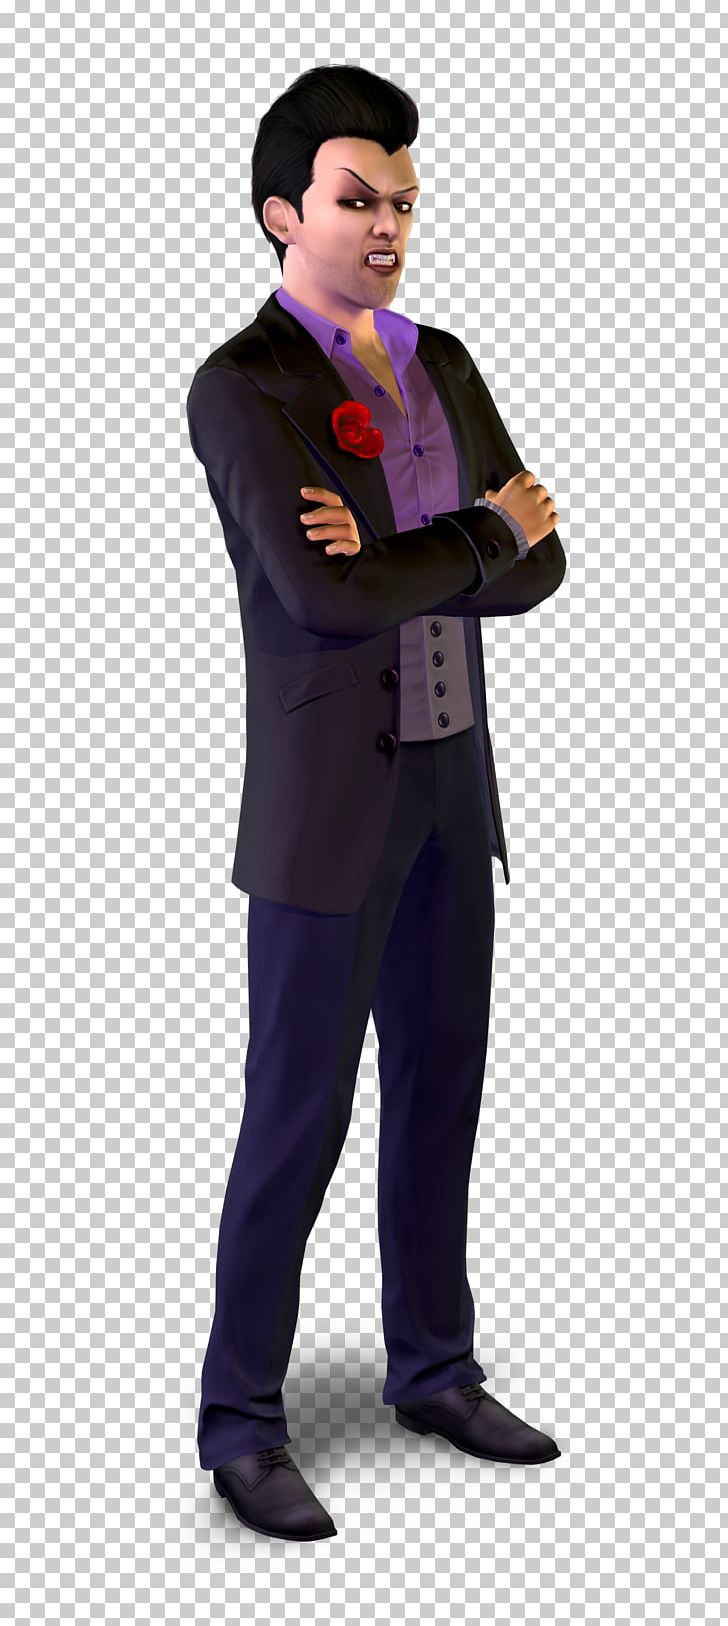 The Sims 3: Supernatural The Sims 3: Late Night The Sims 2: Pets Vampire PNG, Clipart, Costume, Expansion Pack, Formal Wear, Gentleman, Joint Free PNG Download